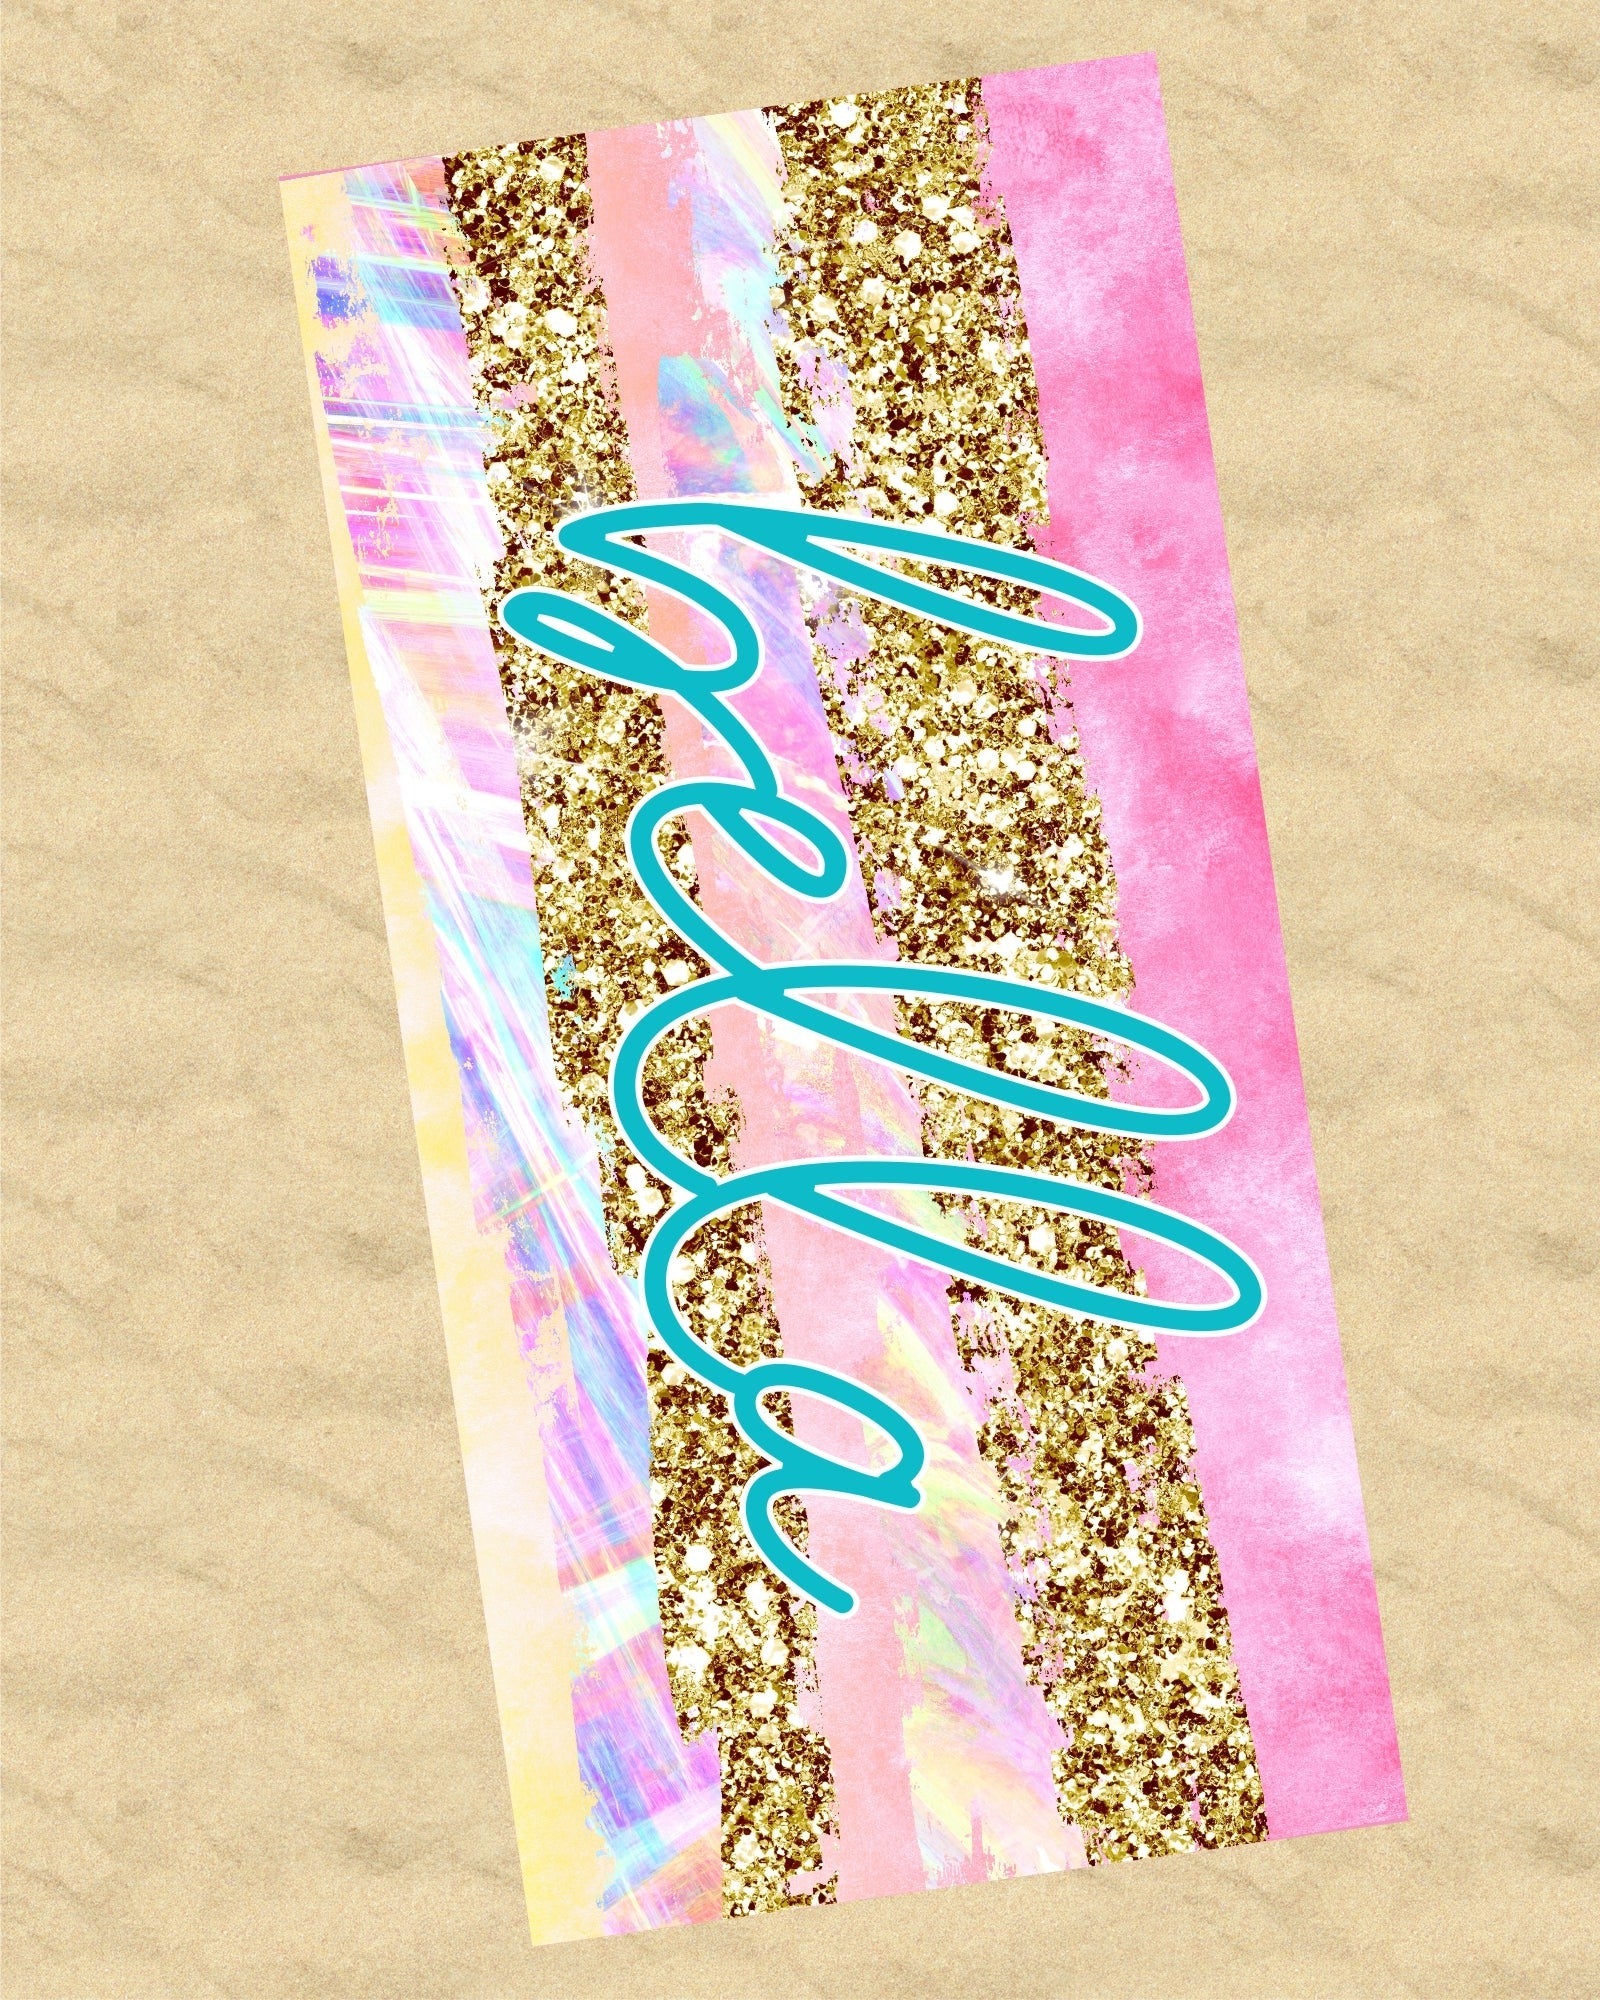 Personalized Pastel and Gold Stripes Beach Towel